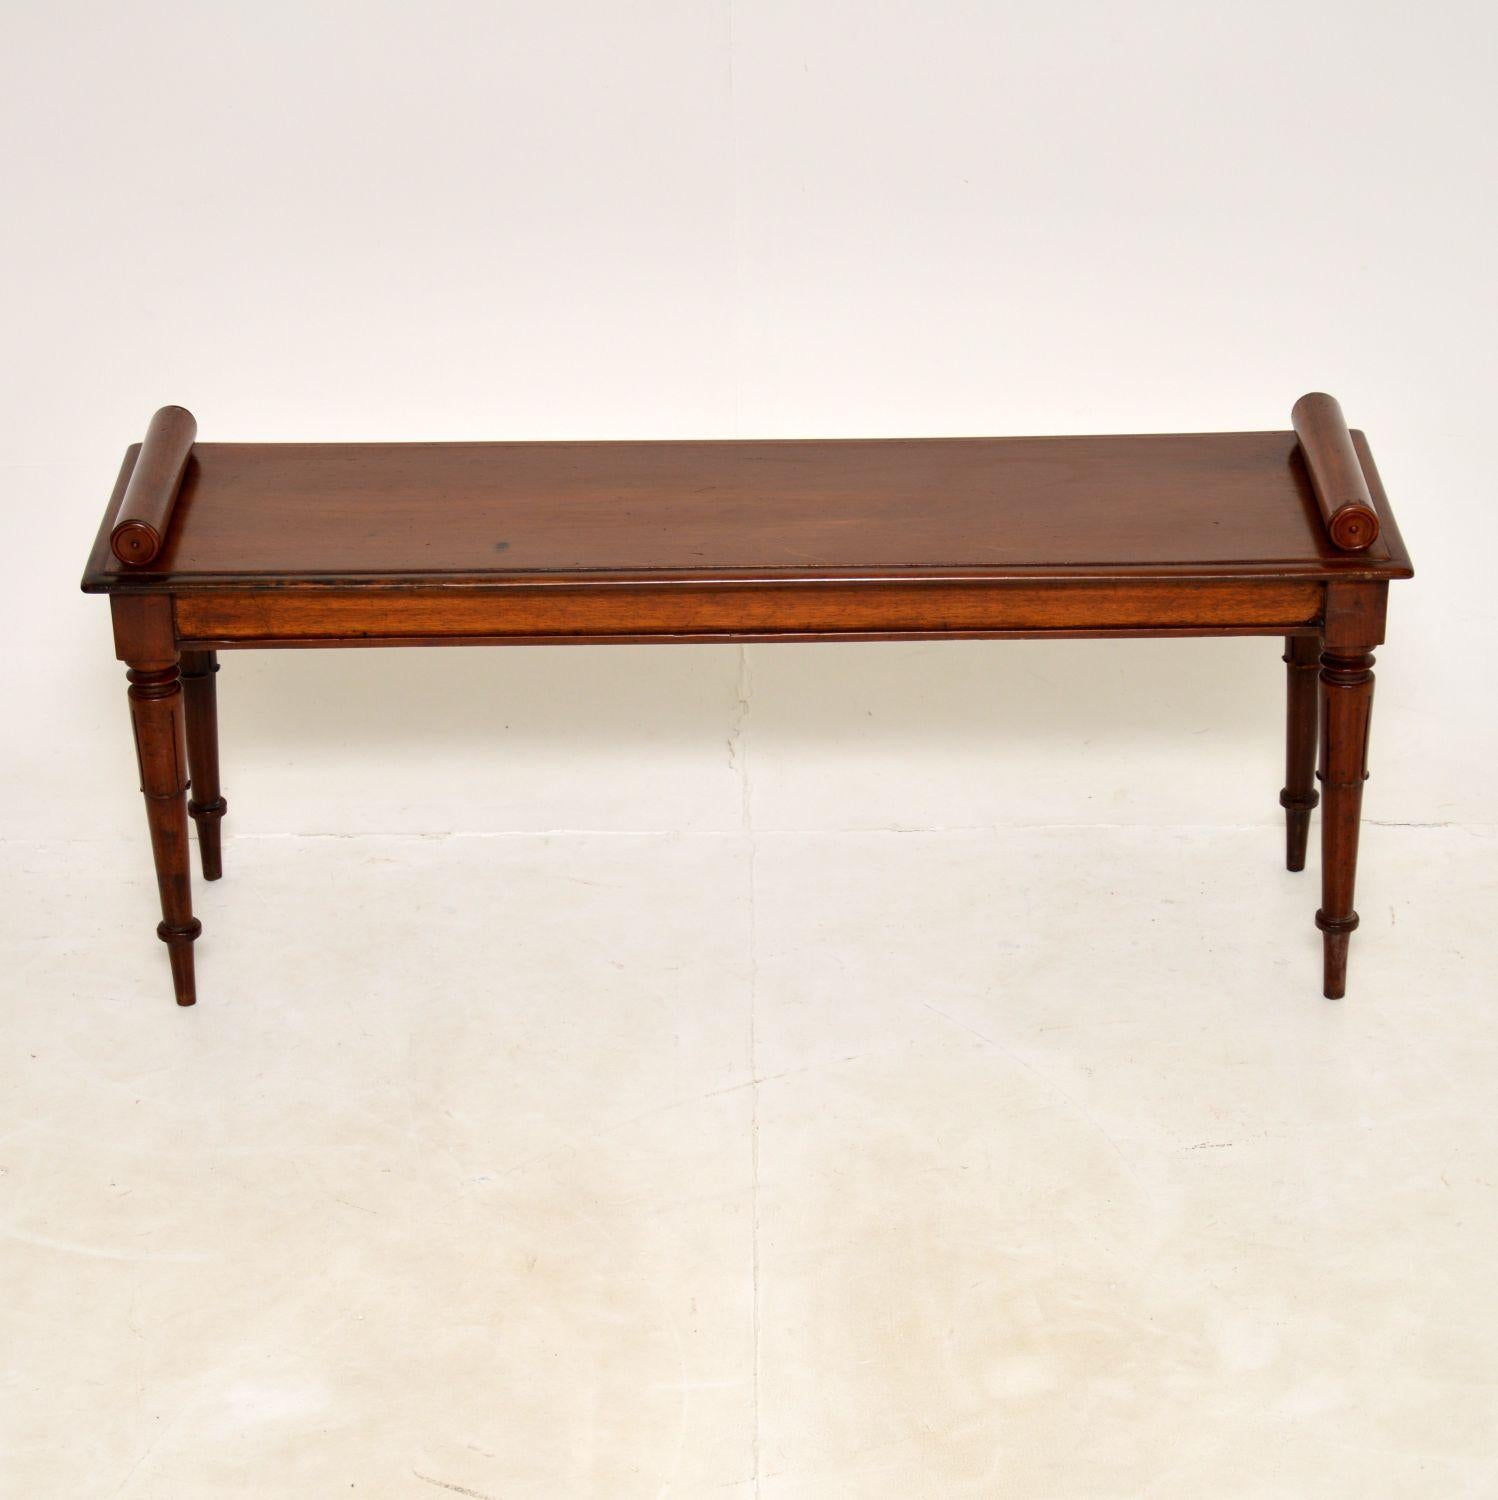 A gorgeous antique low bench in wood. this was made in England & dates from around the 1830-1840’s period.
It is a very useful size, low and long and very sturdy. It is perfect for use as a window seat or bench in a hallway, or even at the foot of